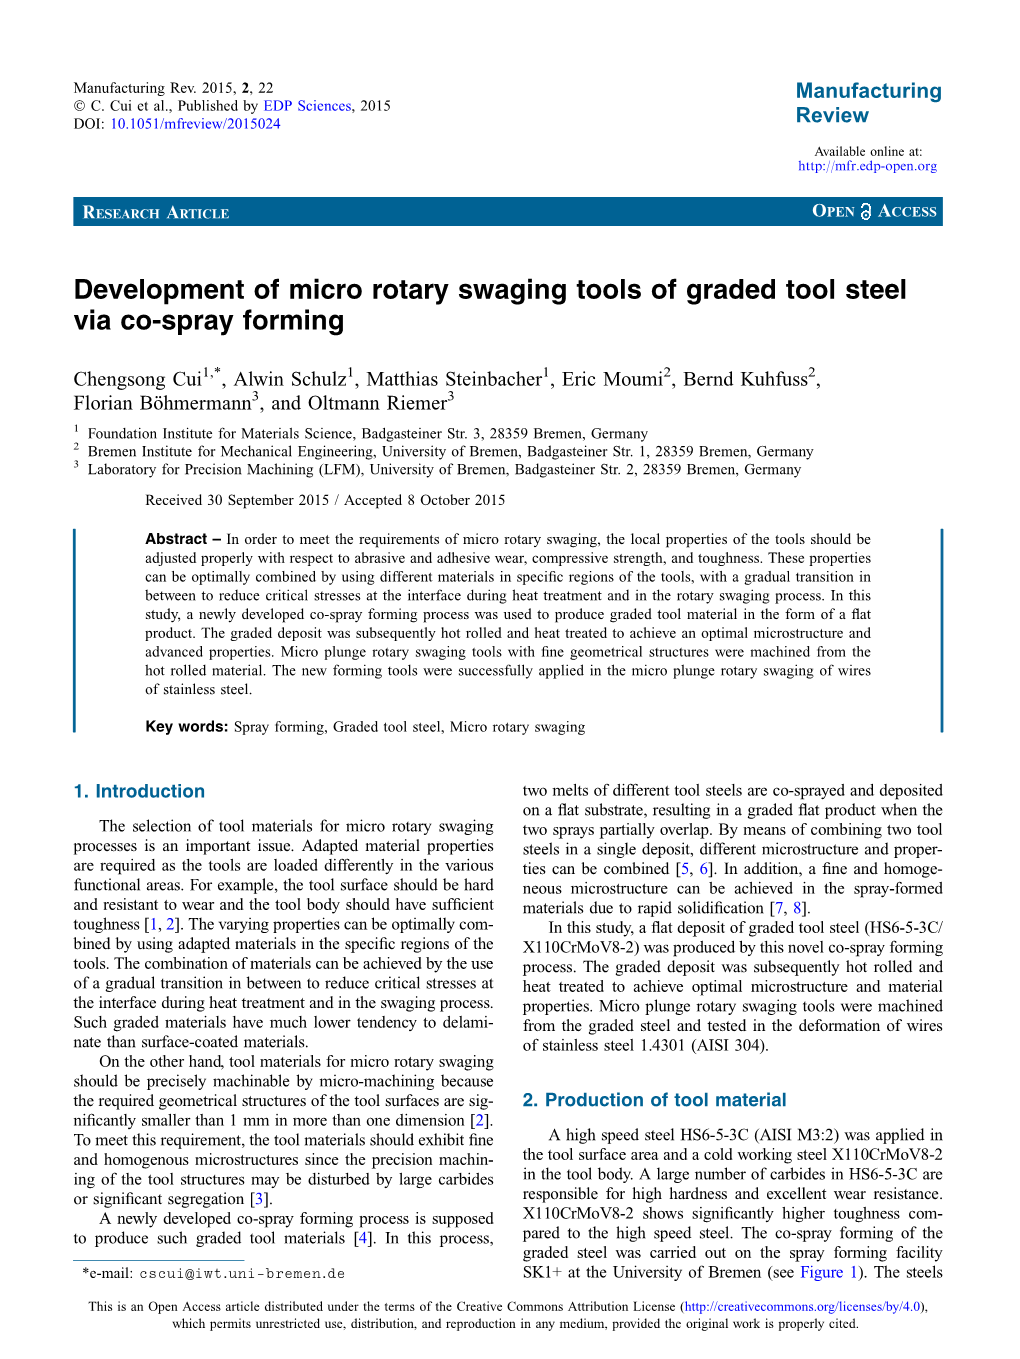 Development of Micro Rotary Swaging Tools of Graded Tool Steel Via Co-Spray Forming